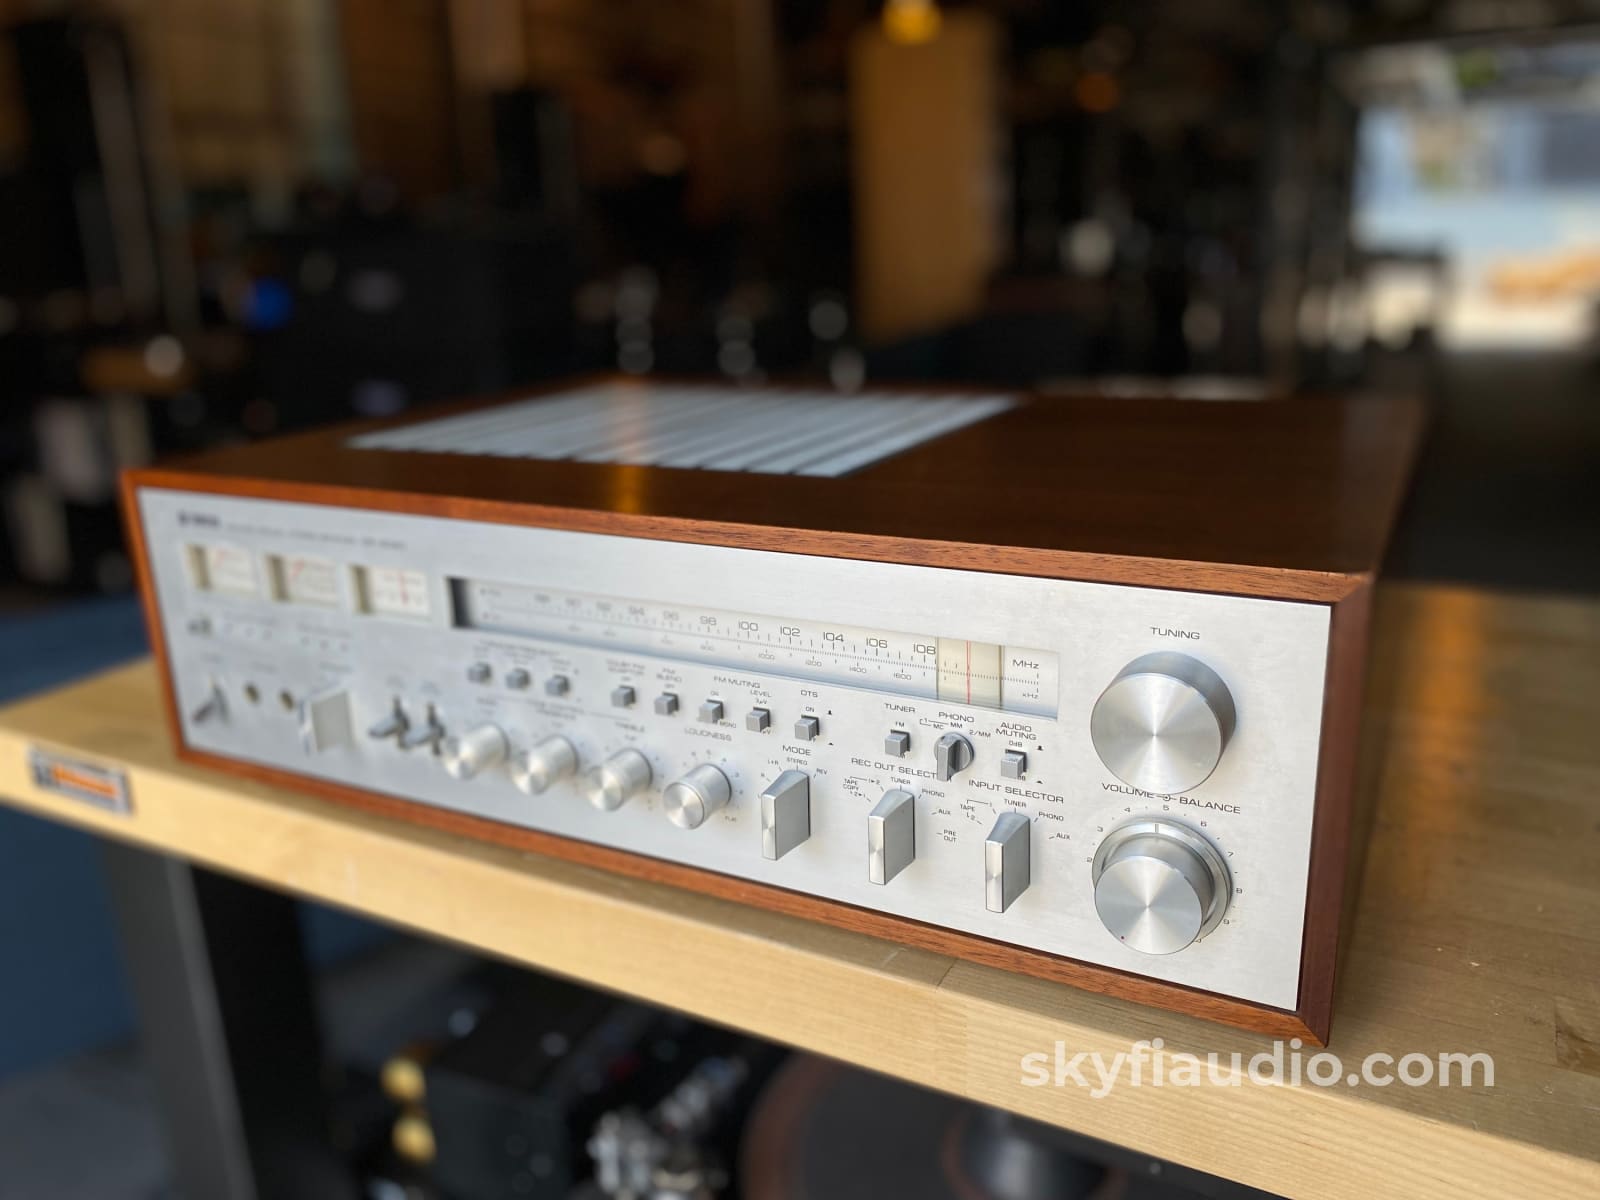 Yamaha Cr2020 Vintage Receiver - Serviced And Gorgous Integrated Amplifier